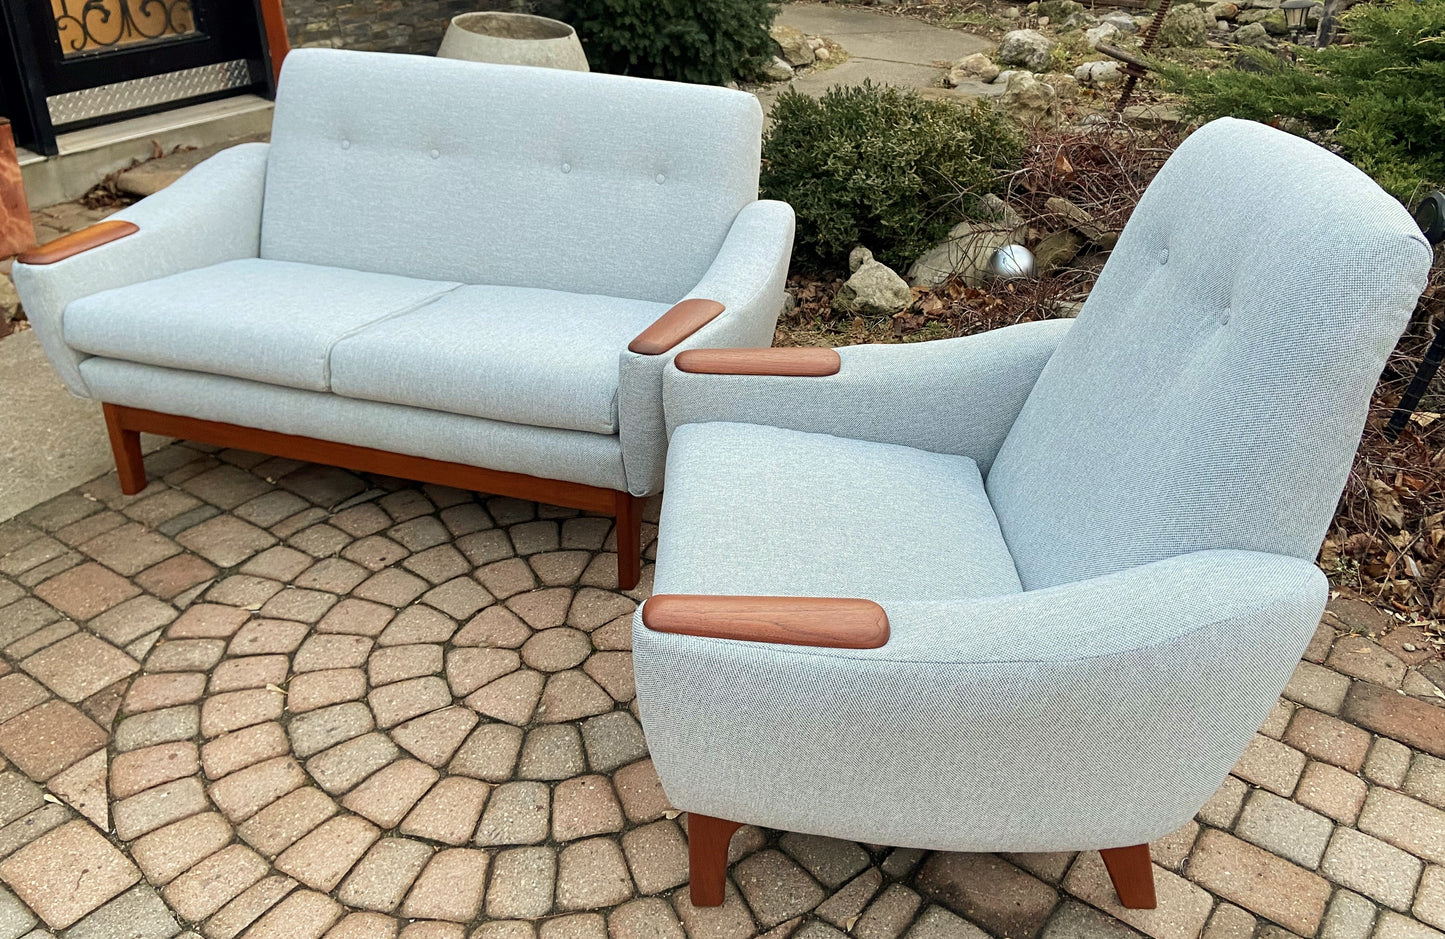 REFINISHED & REUPHOLSTERED in Maharam MCM Teak Loveseat & Armchair by Huber, Perfect